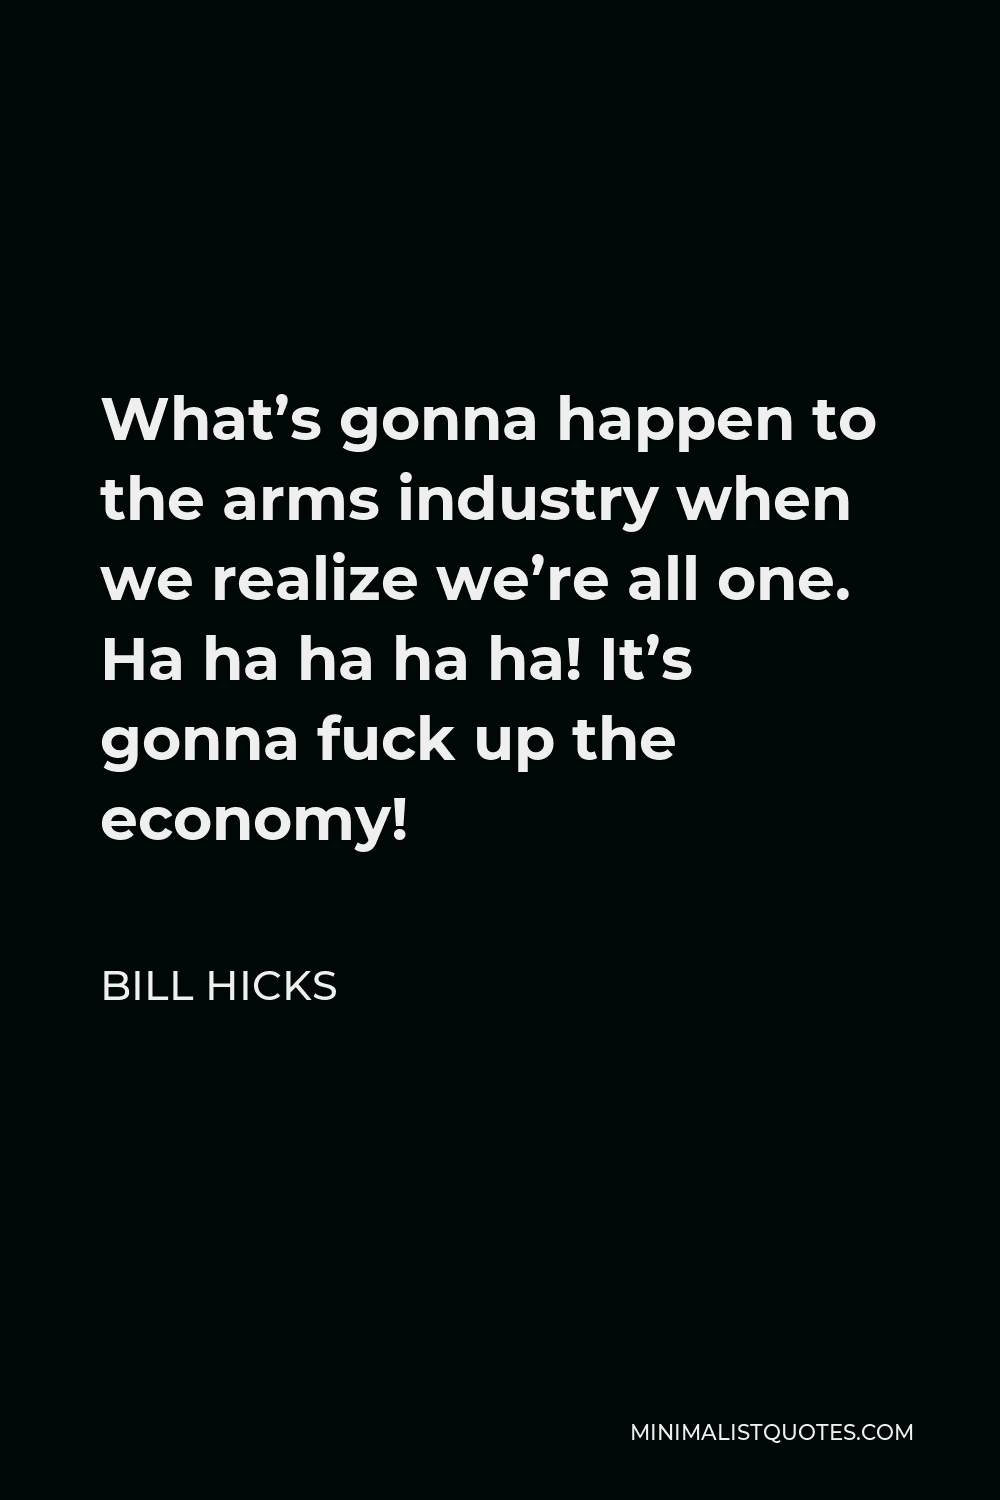 Bill Hicks Quote - What’s gonna happen to the arms industry when we realize we’re all one. Ha ha ha ha ha! It’s gonna fuck up the economy!